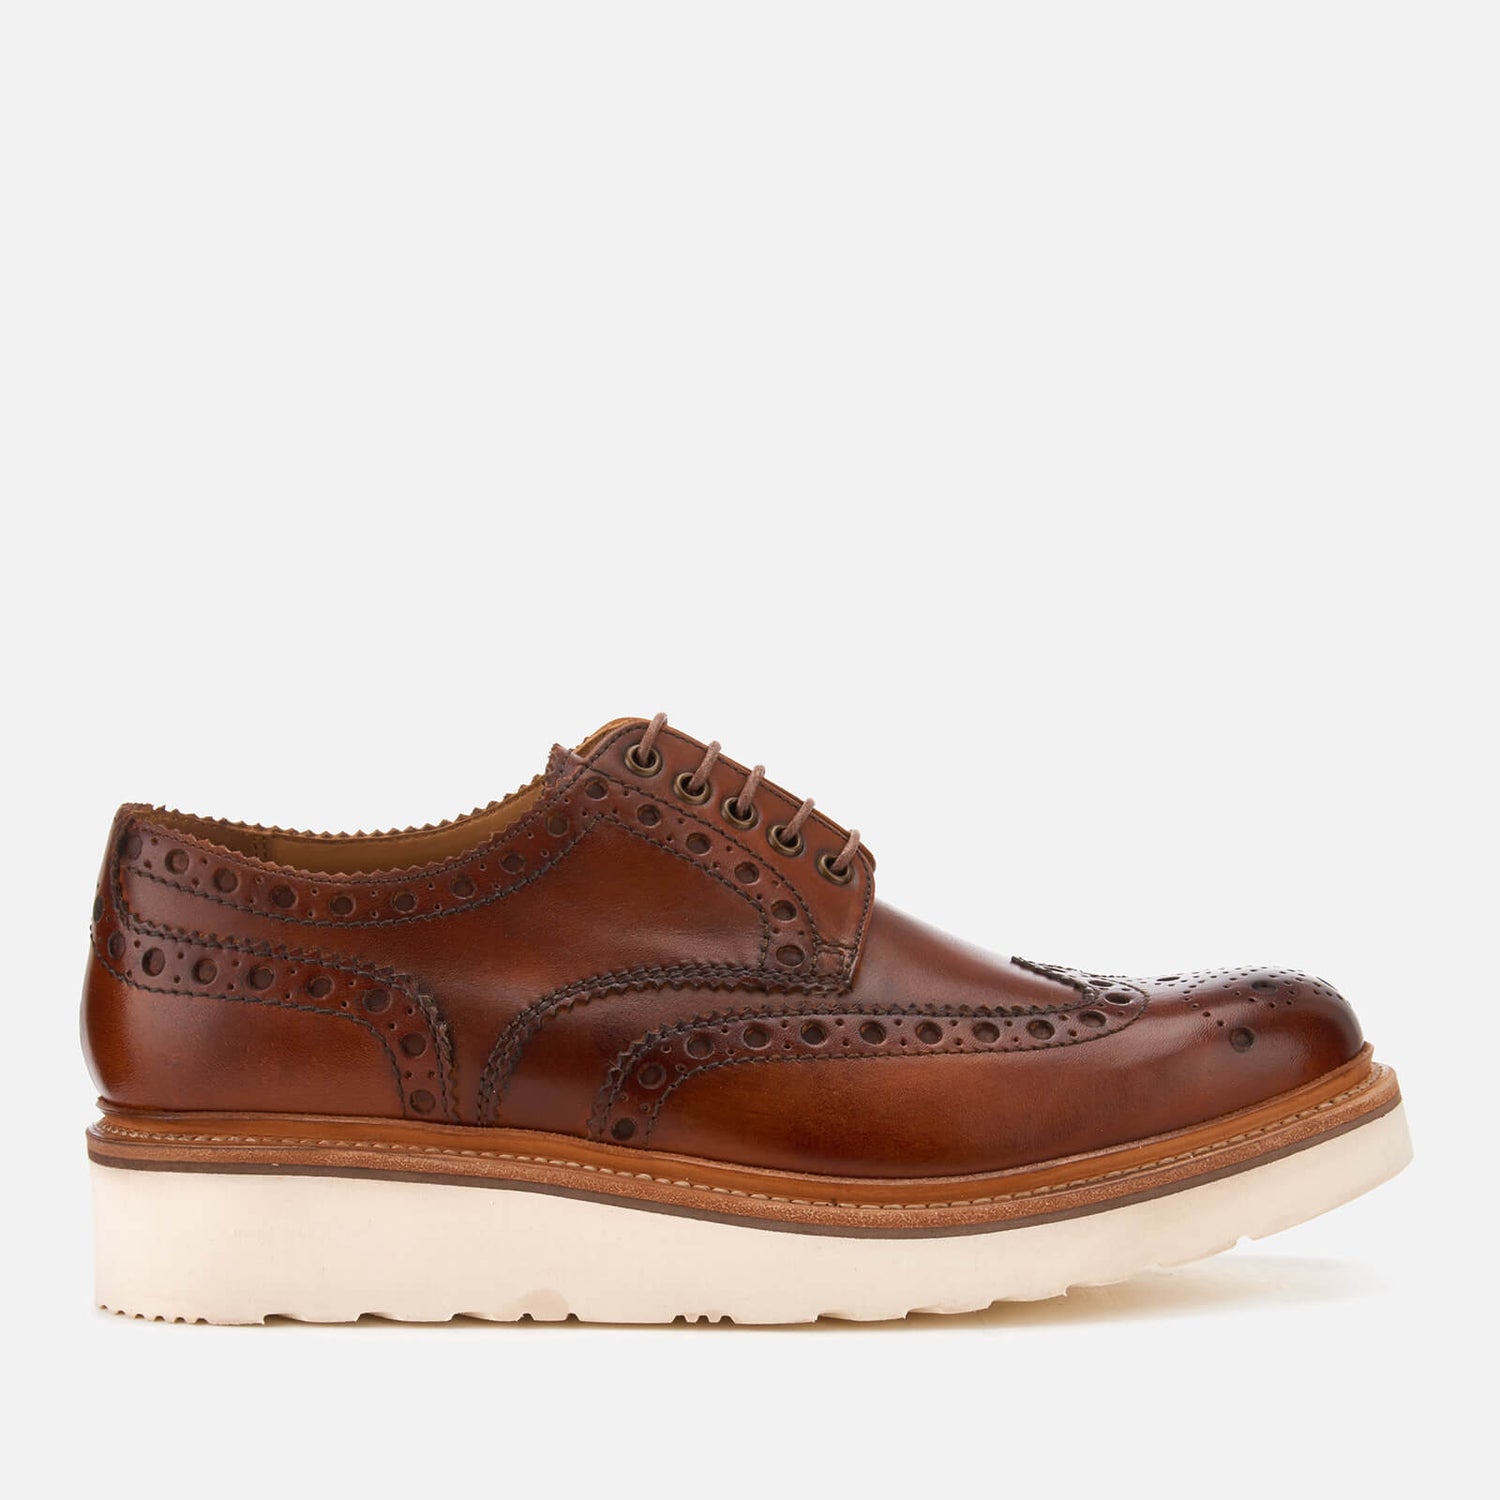 Grenson Men's Archie V Hand Painted Leather Brogues - Tan - Free UK ...